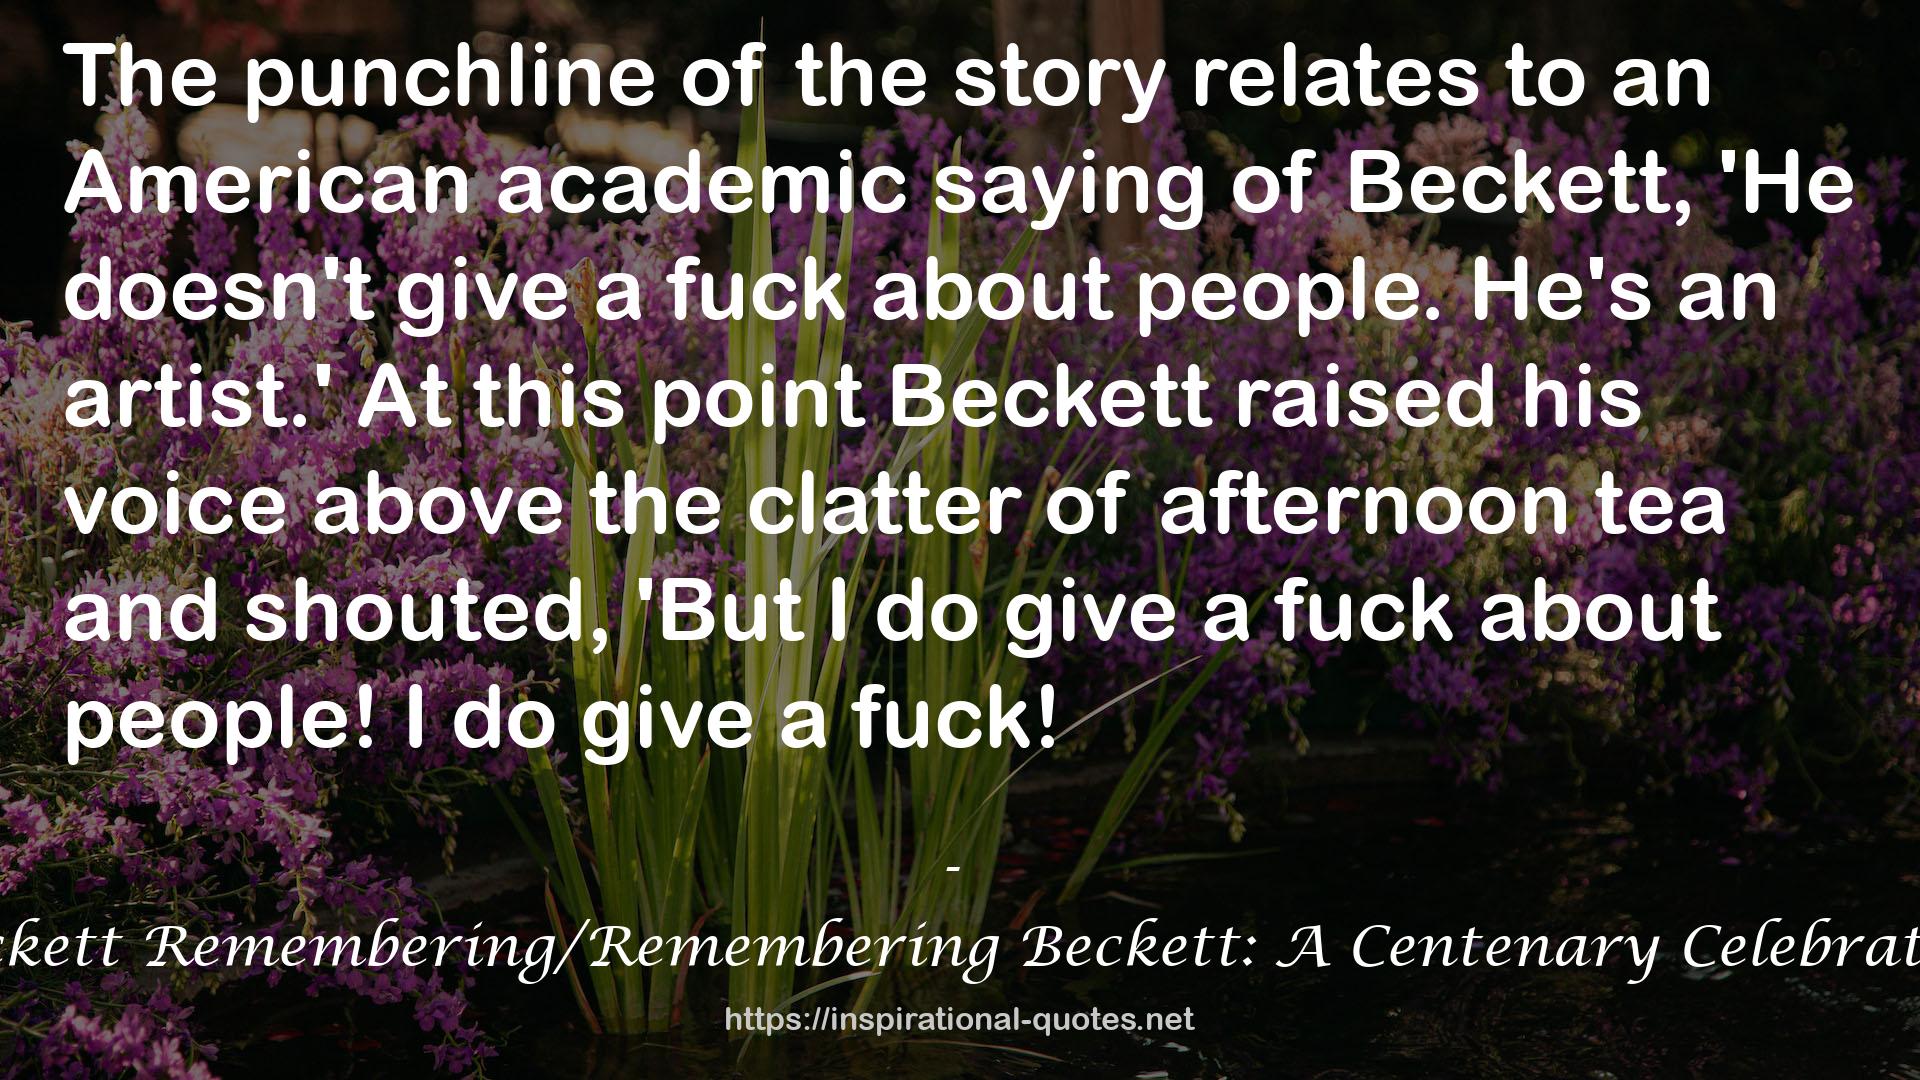 Beckett Remembering/Remembering Beckett: A Centenary Celebration QUOTES